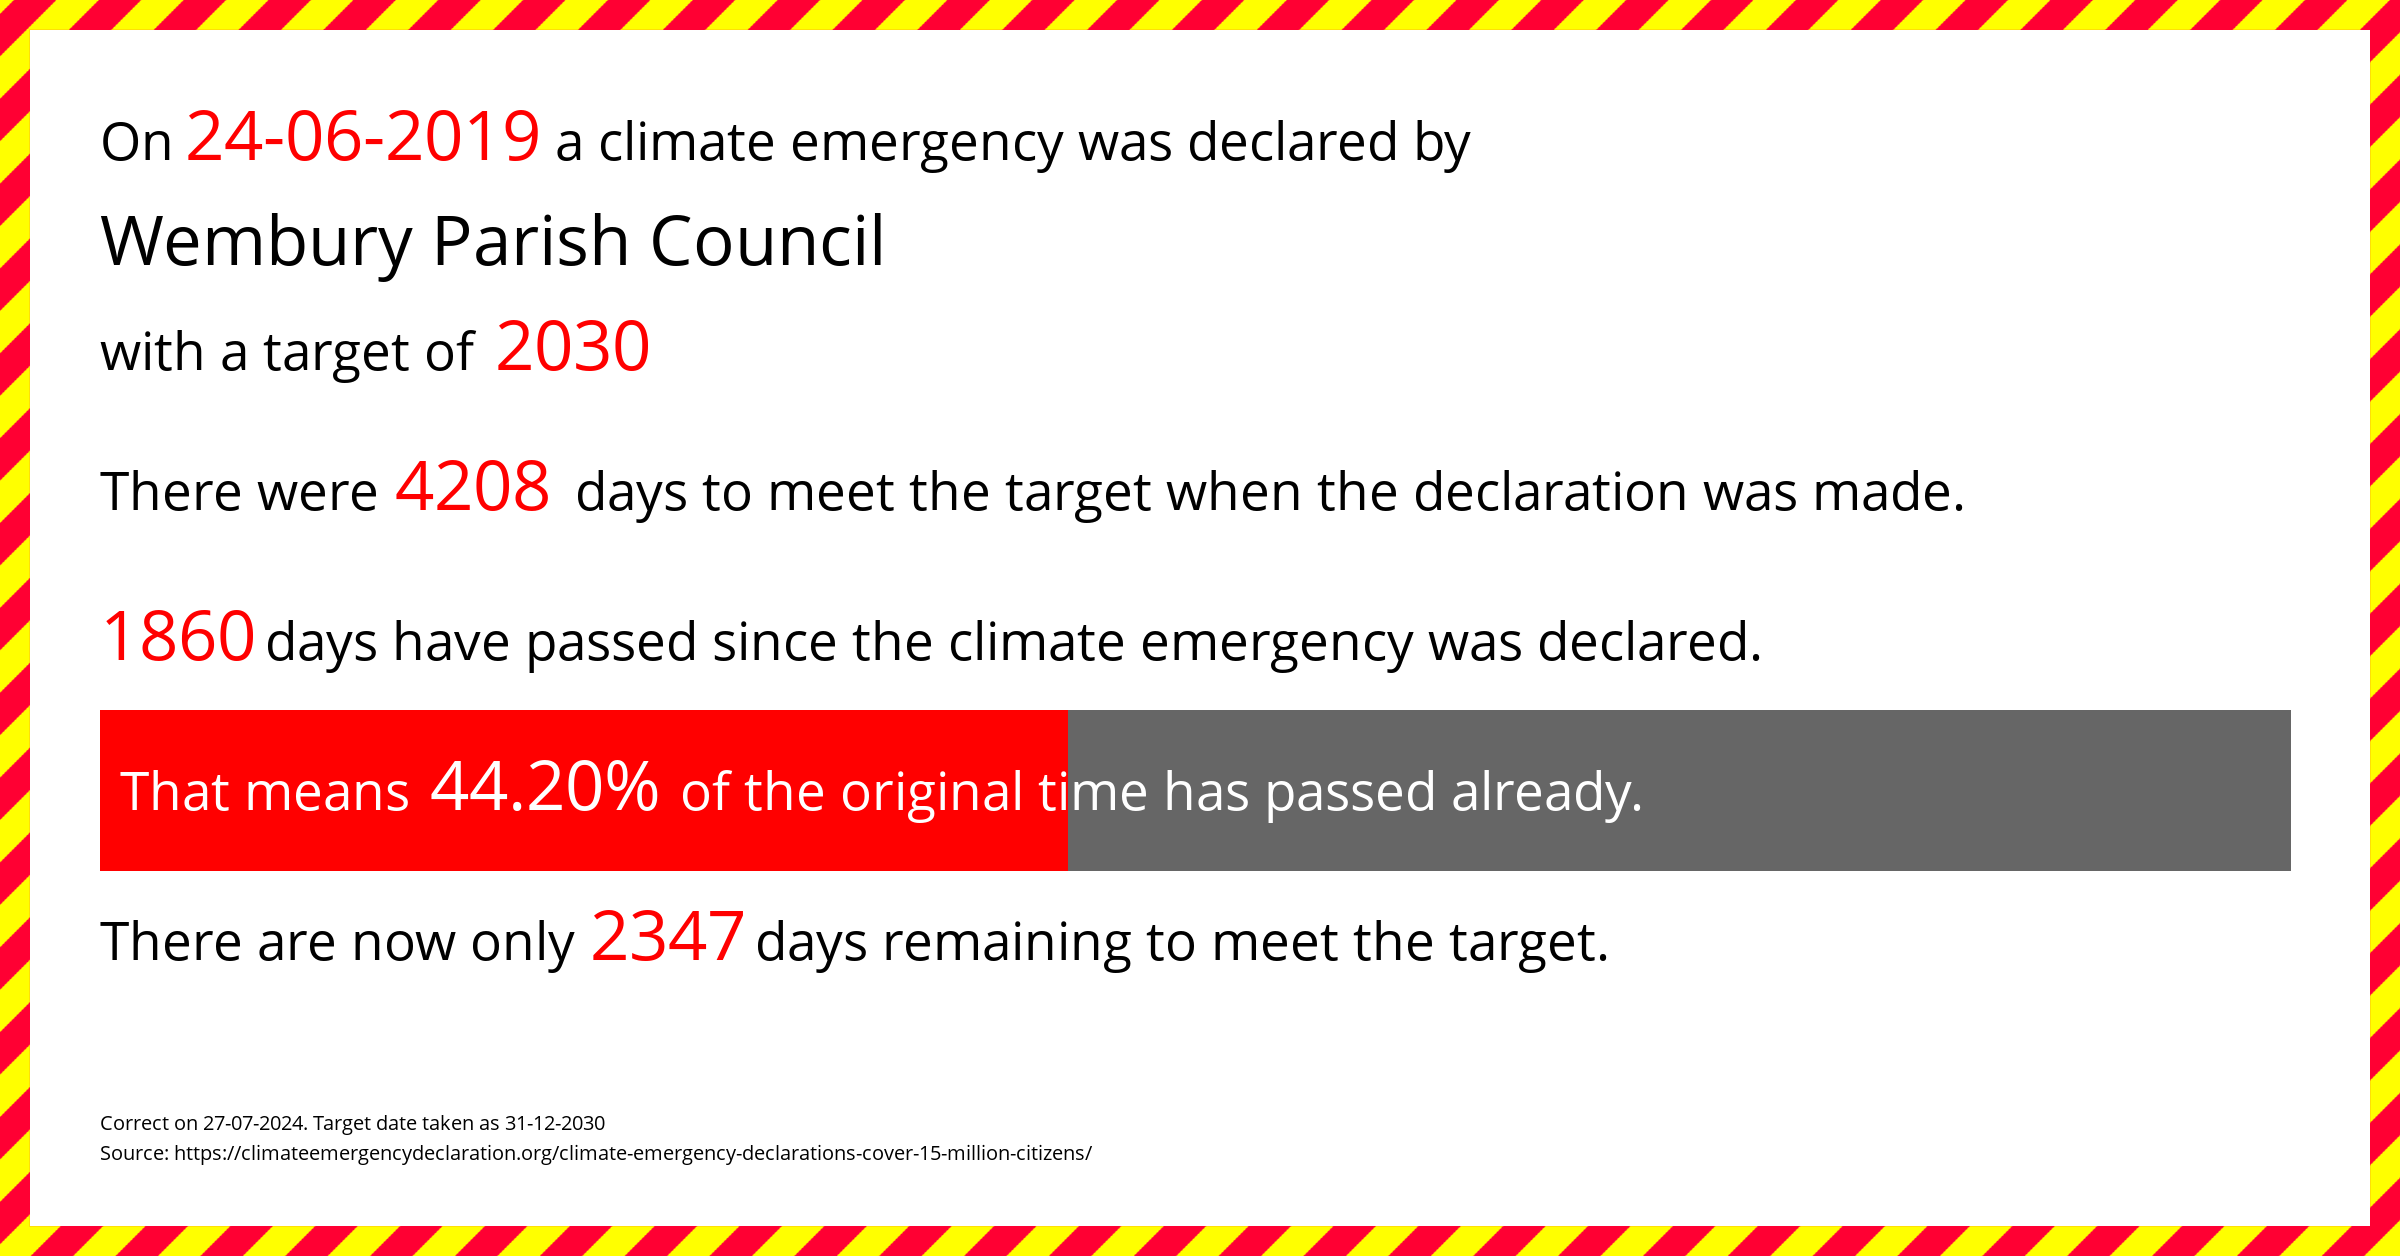 Wembury Parish Council declared a Climate emergency on Monday 24th June 2019, with a target of 2030.